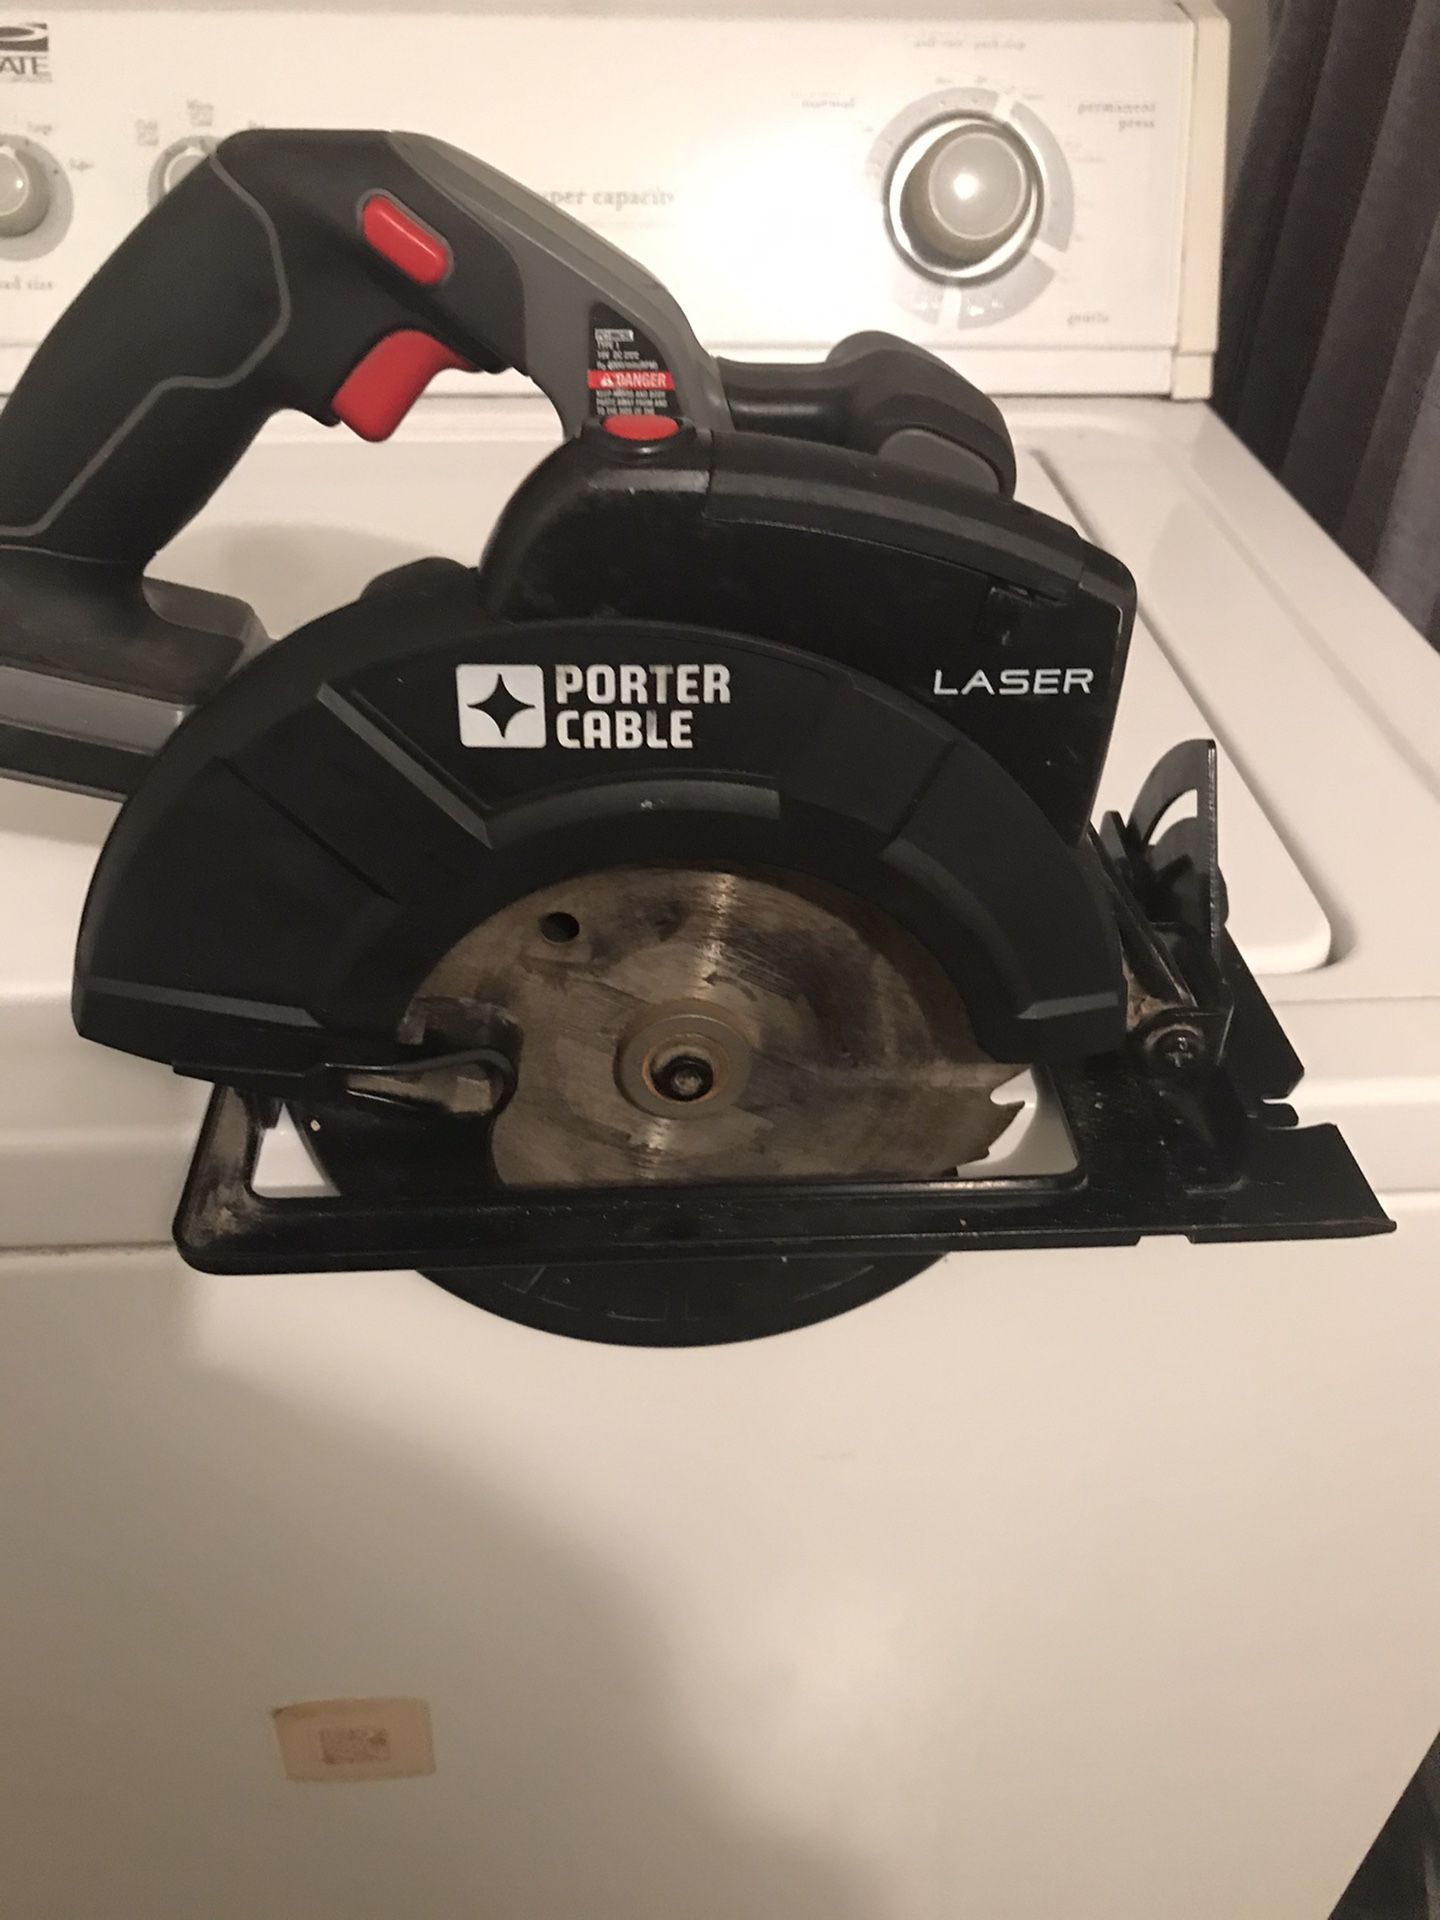 Porter cable saw with lazer